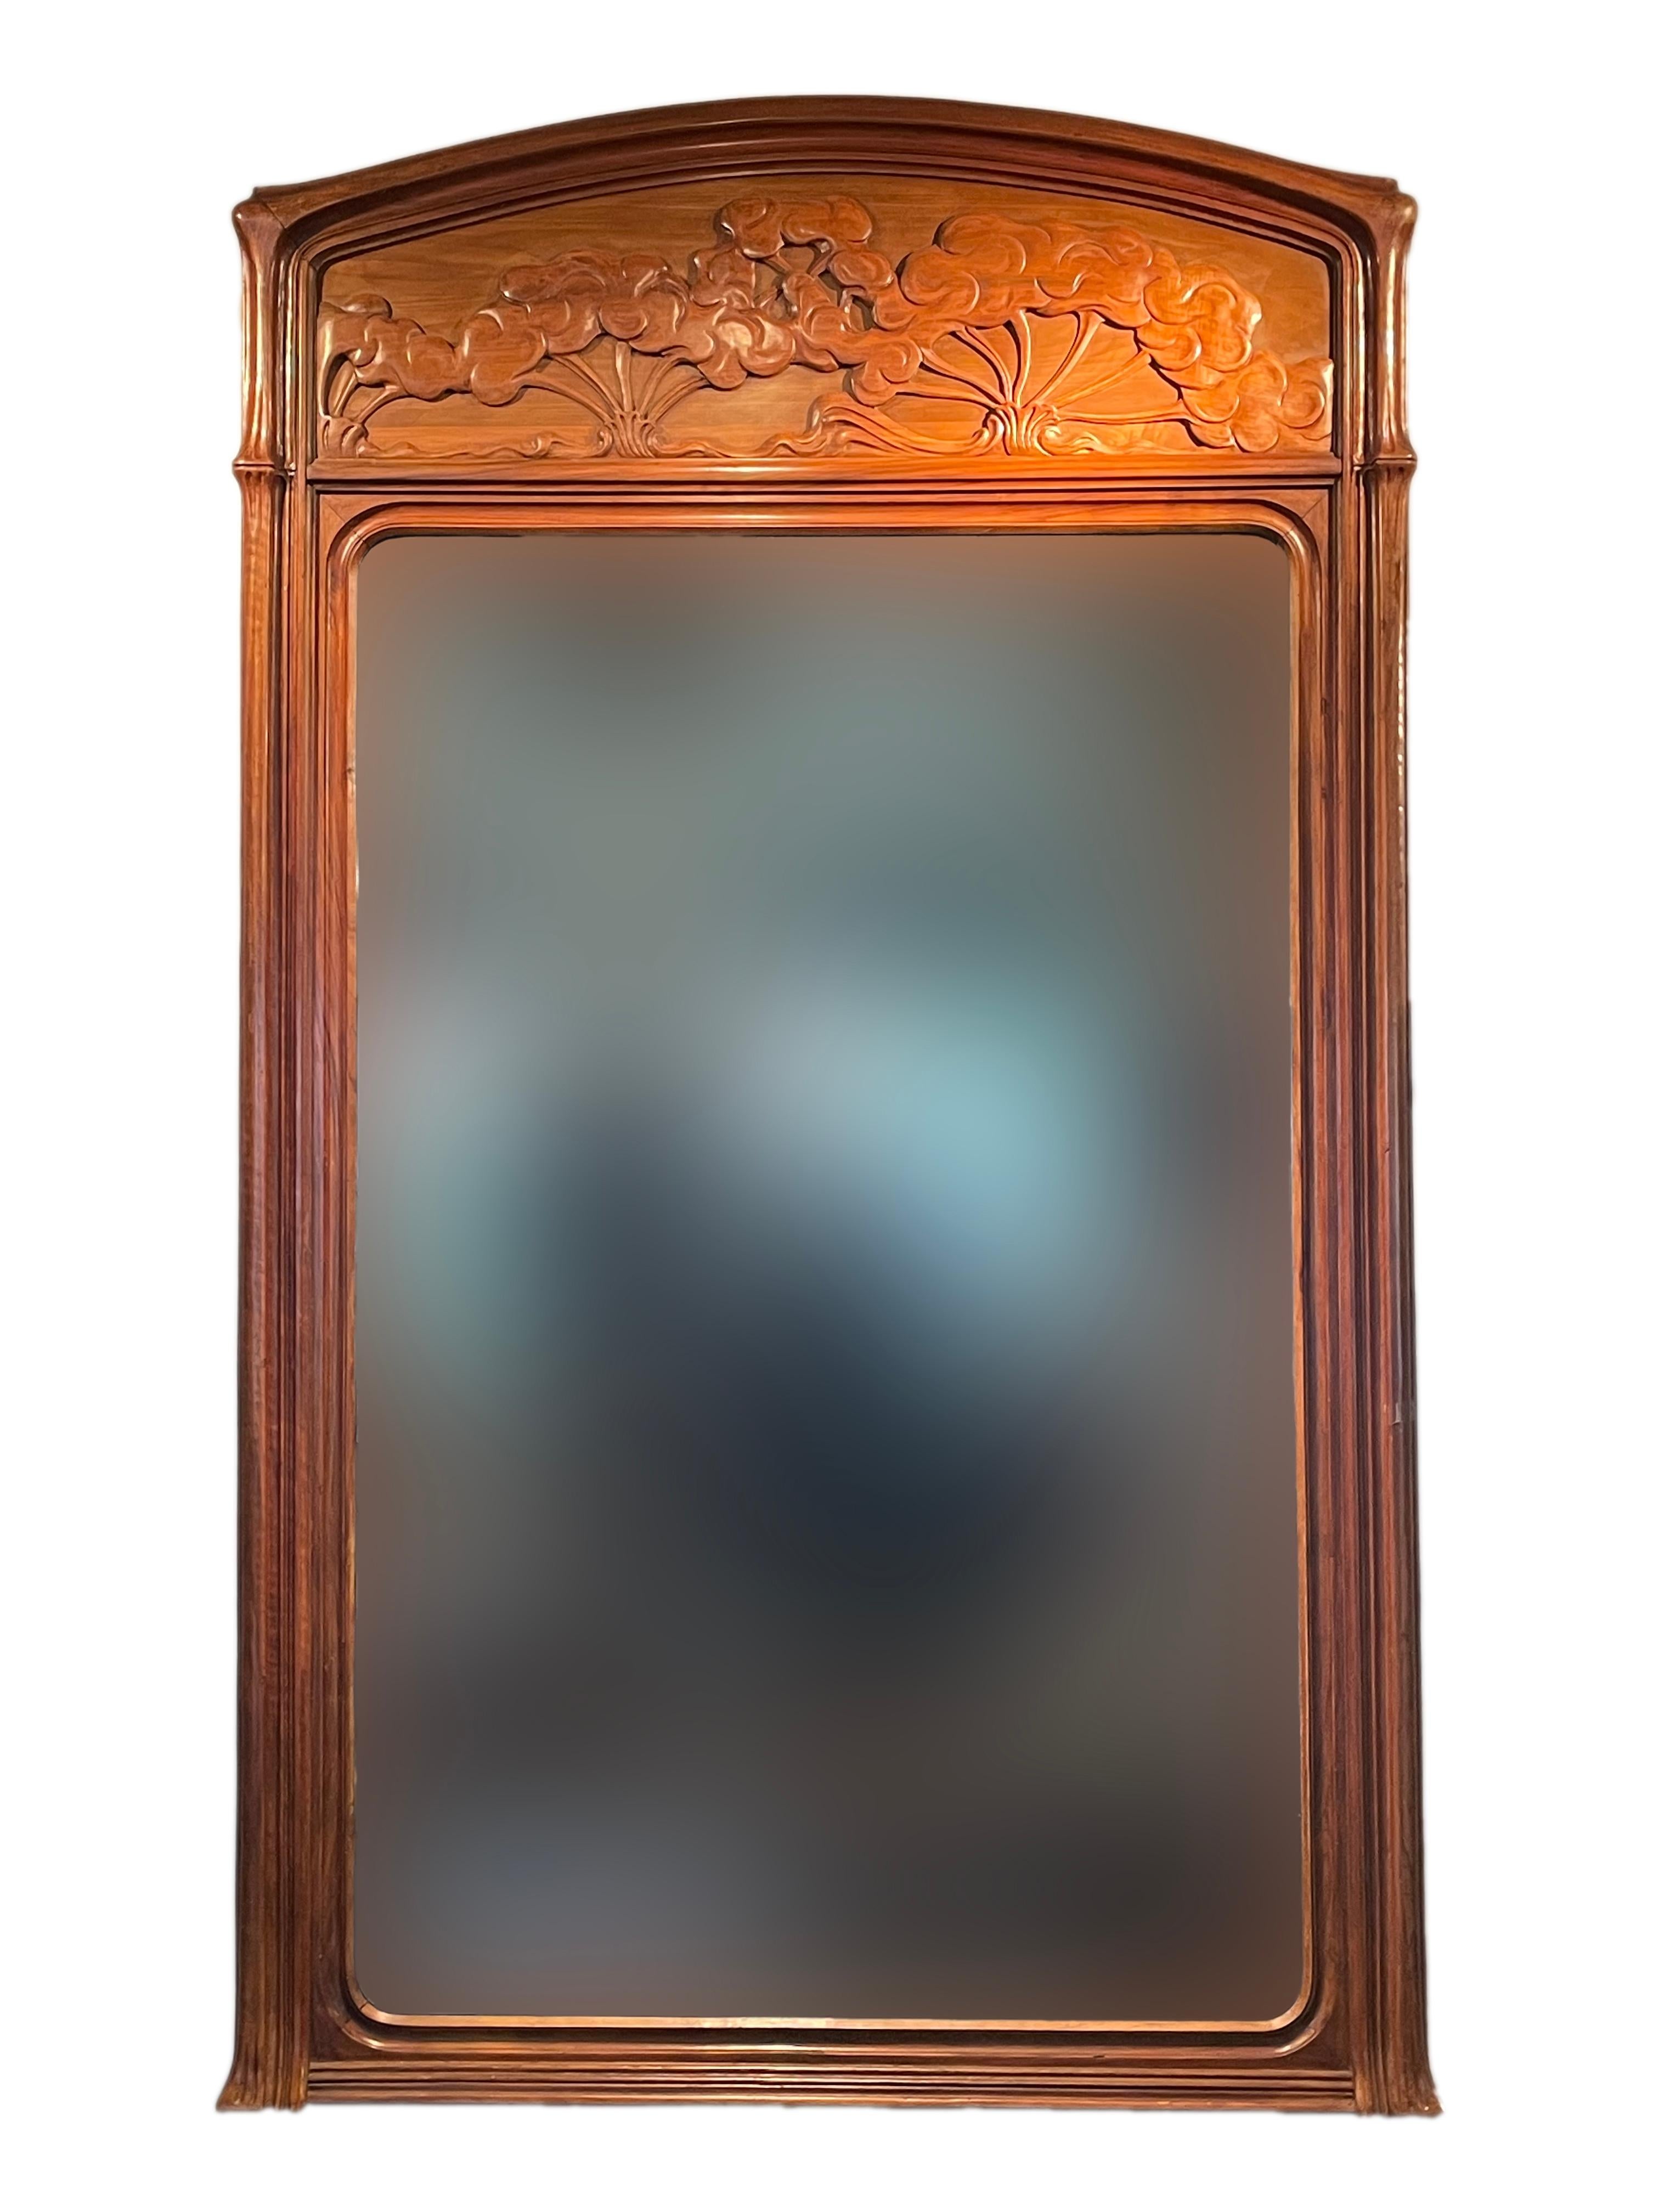 An early 20th century French Art Nouveau carved wood